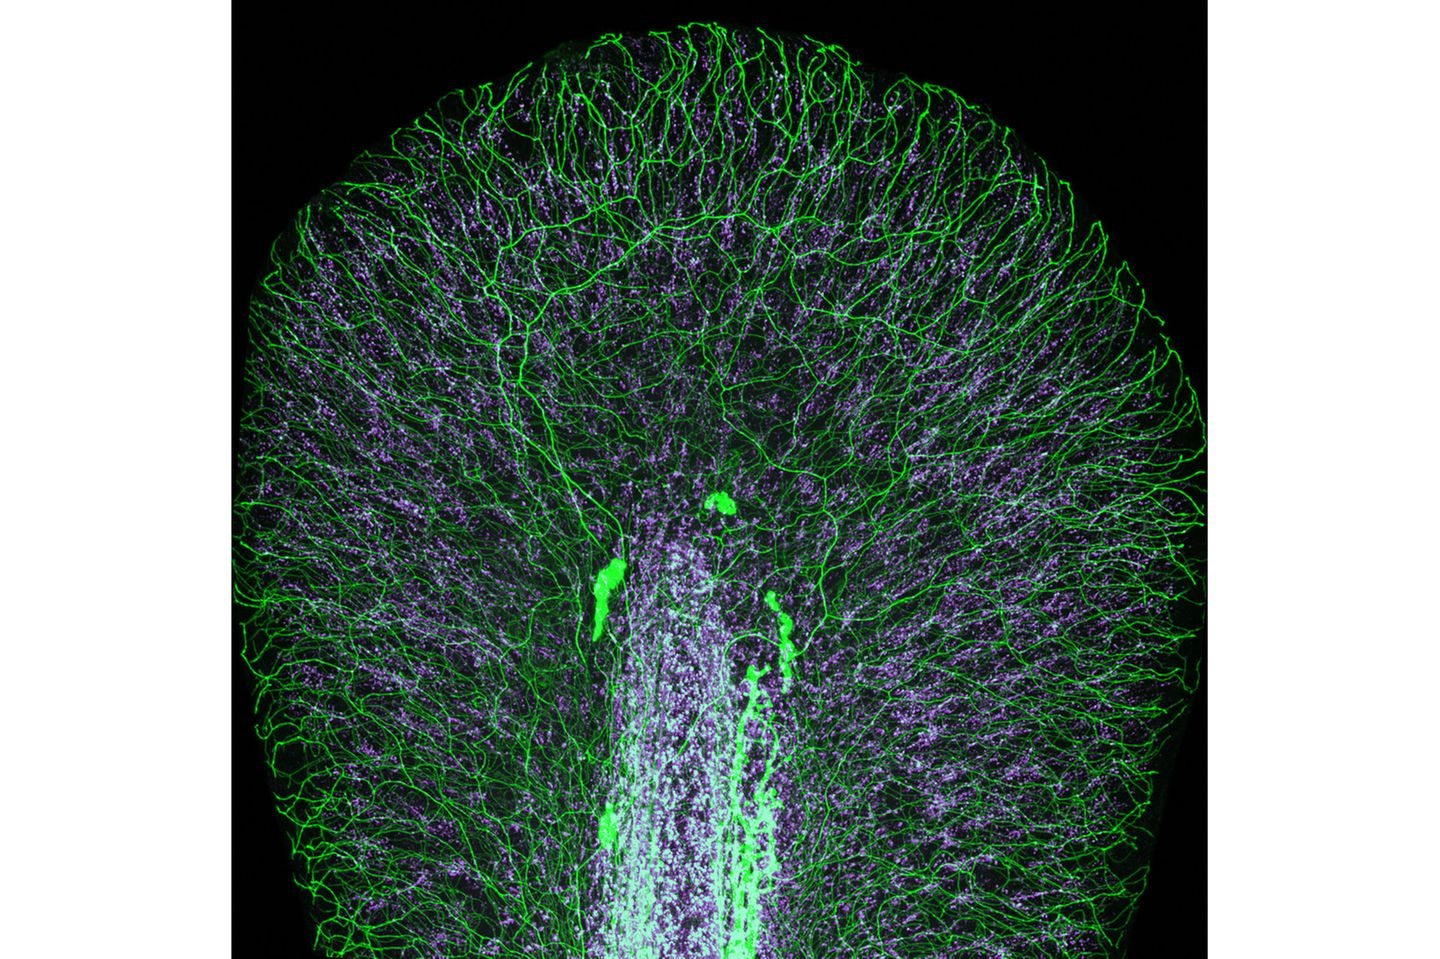 17th Place    Dr. Daniel Wehner & Julia Kolb    Max Planck Institute for the Science of Light    Department of Biological Optomechanics    Erlangen, Bavaria, Germany    Tail fin of a zebrafish larva with peripheral nerves (green) and extracellular matrix (violet)    Confocal    10X (Objective Lens Magnification)